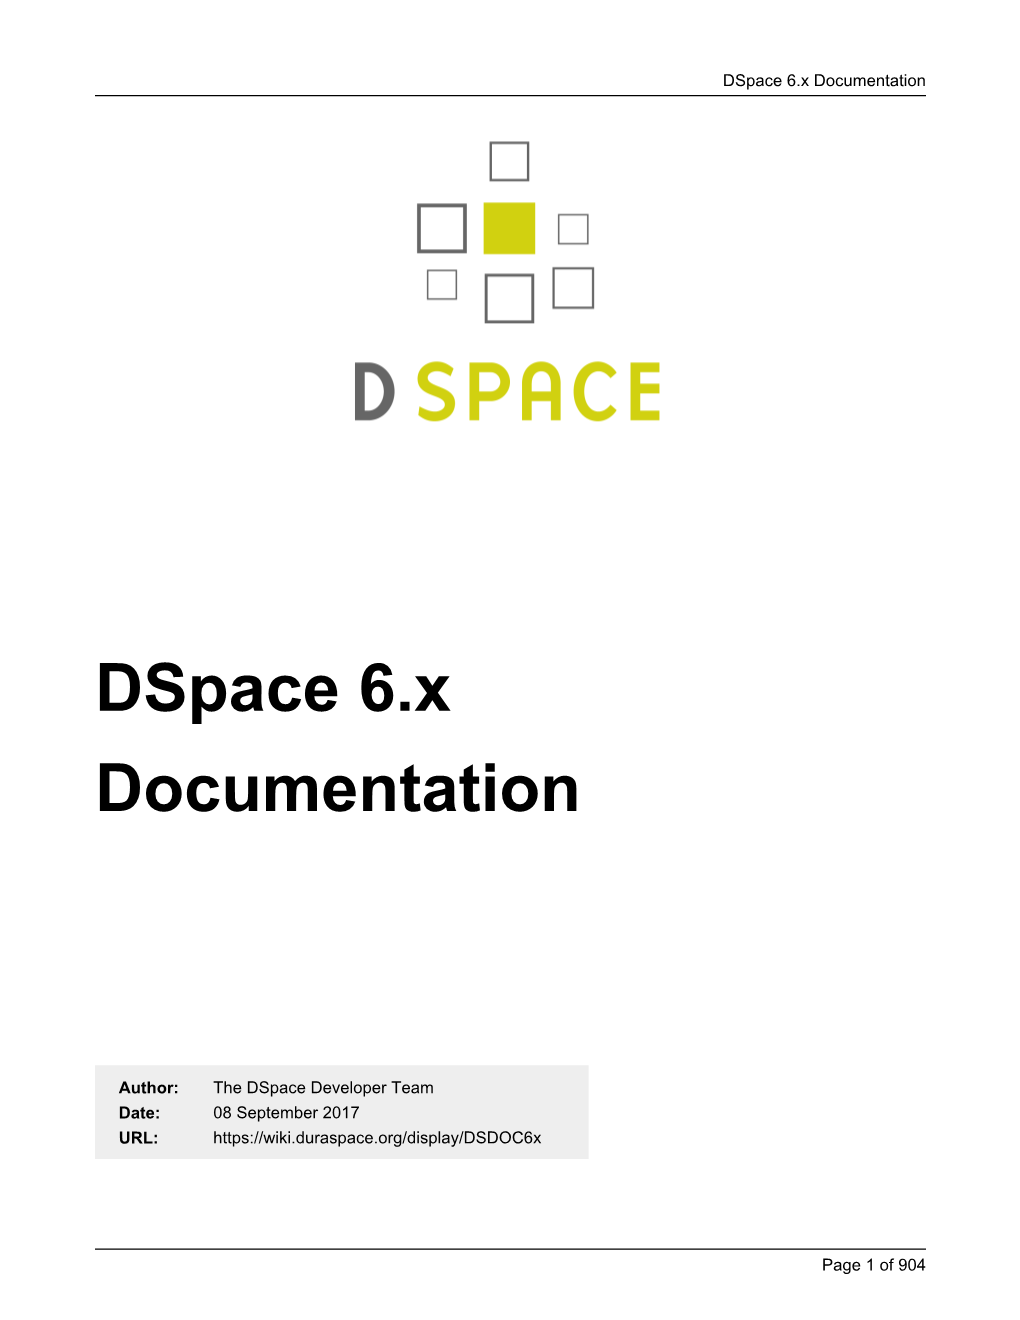 Dspace Manual at This Point, You Should Have a Completely Empty, but Fully-Functional Dspace Installation